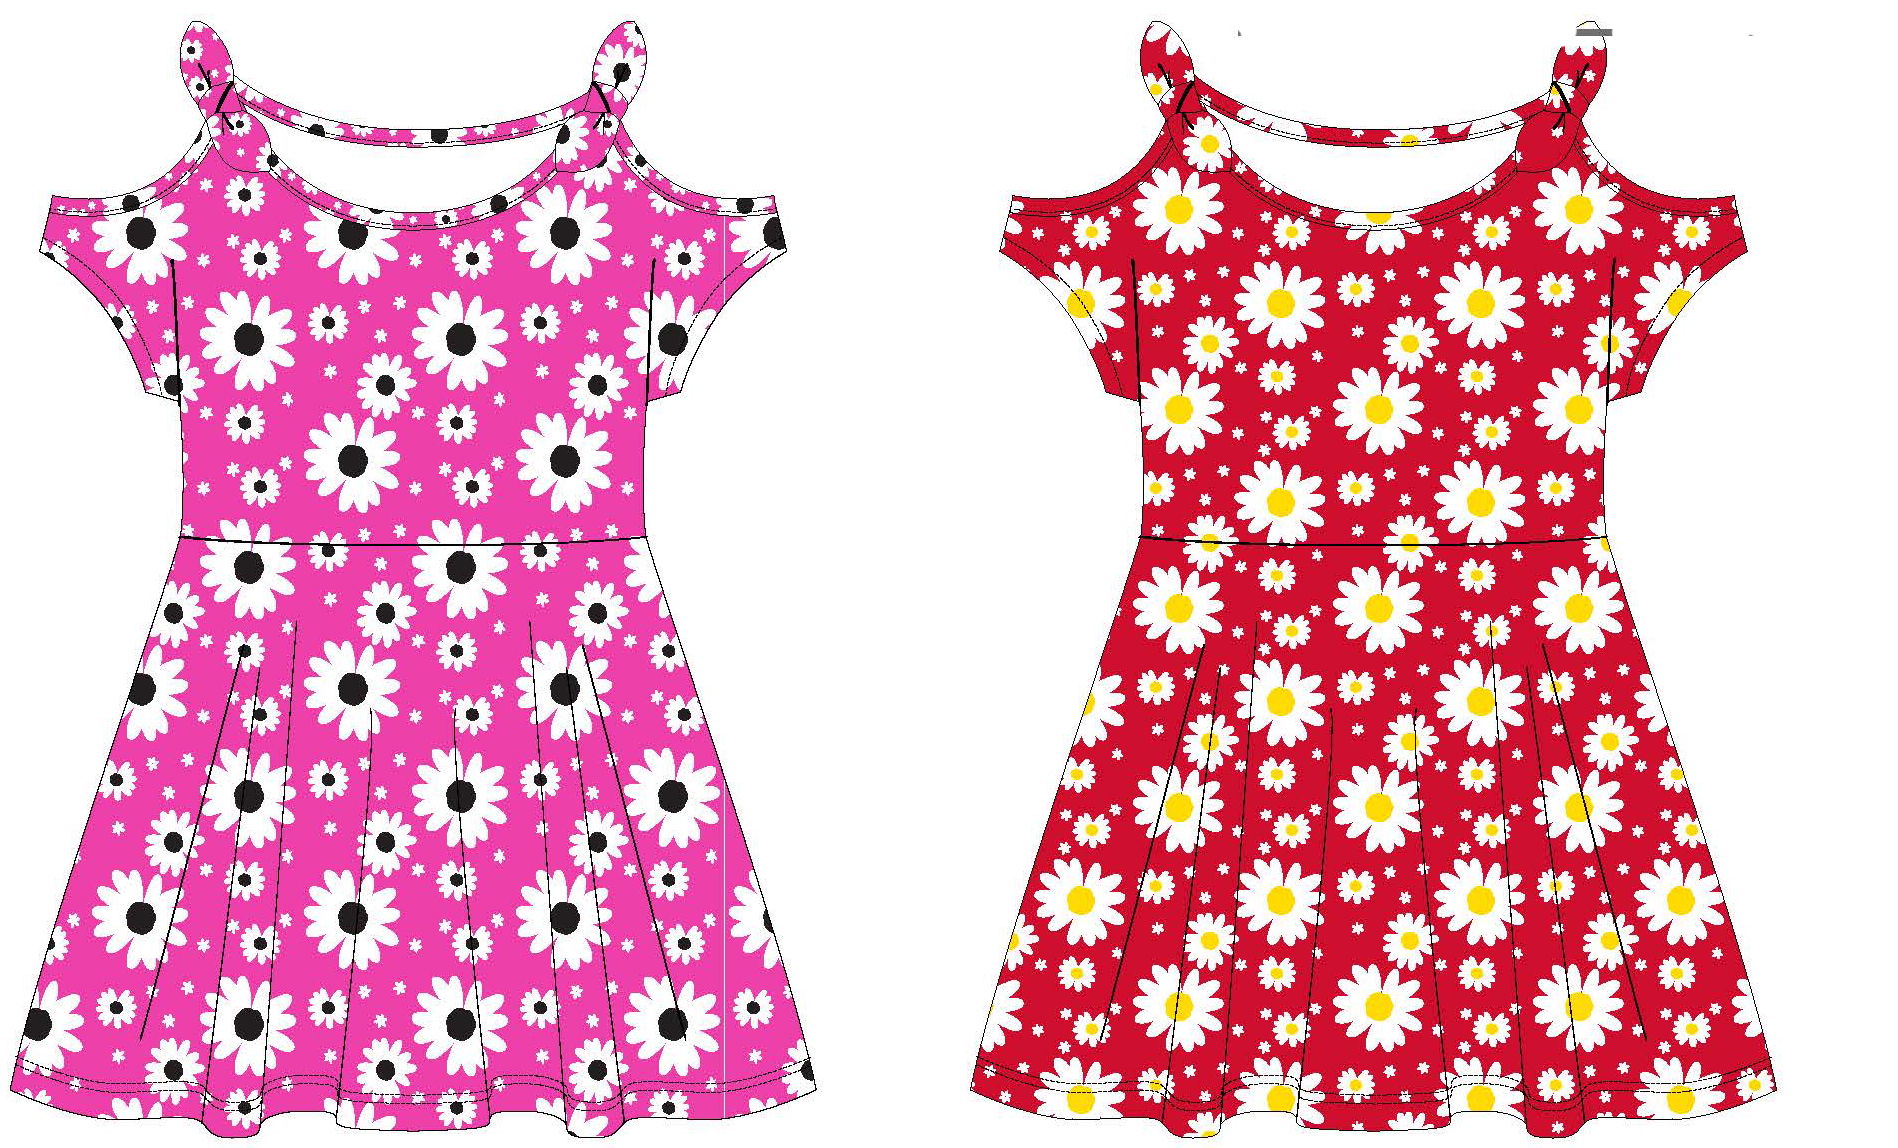 Toddler Girl's Printed Knit DRESS w/ Daisy Pop Floral Print - Sizes 2T-4T